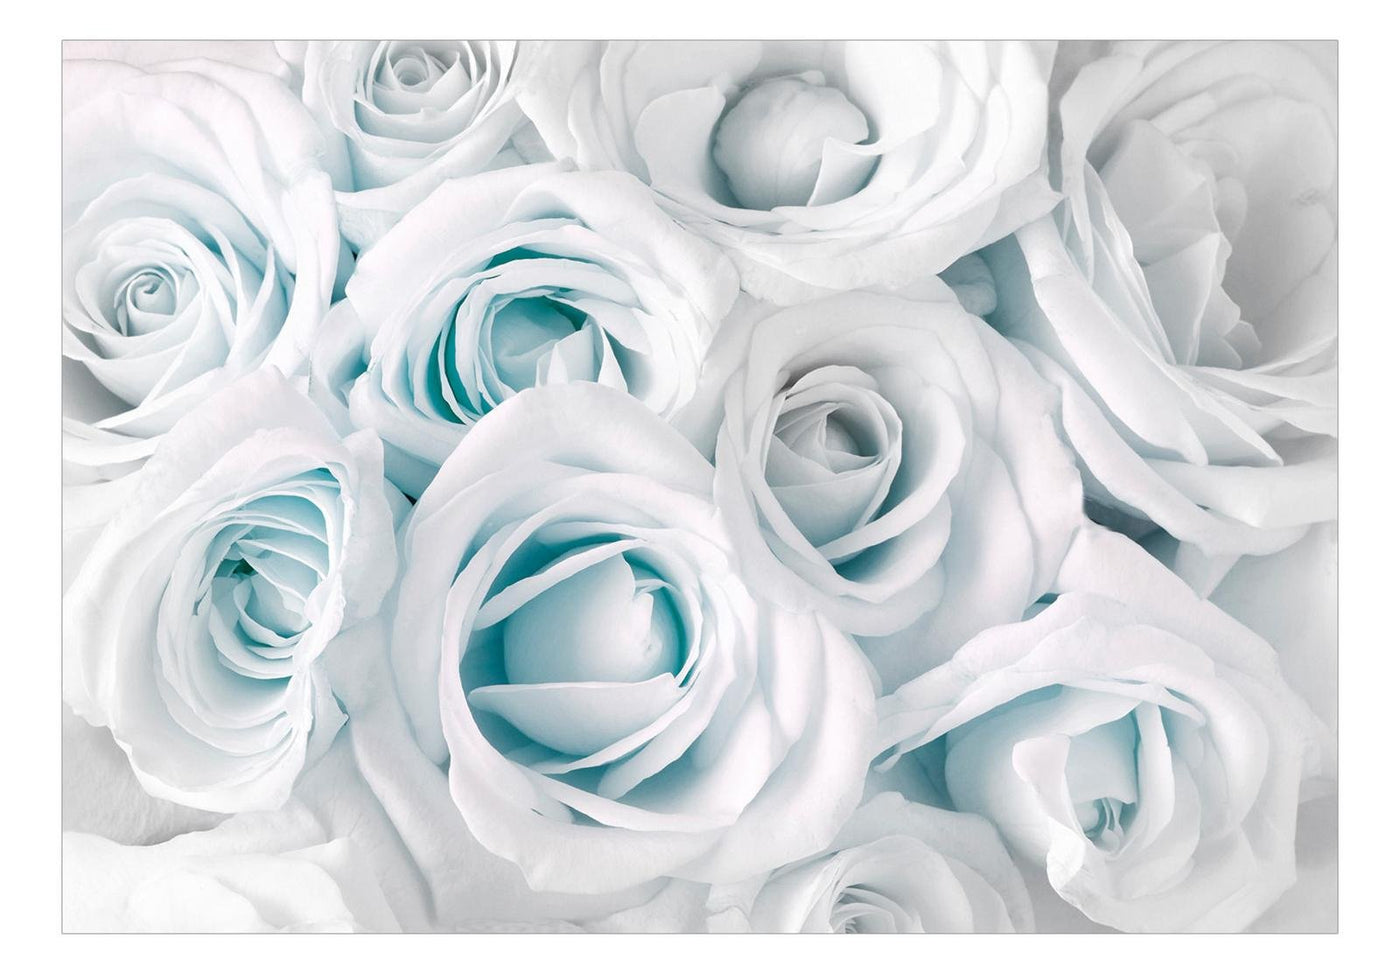 Peel and stick wall mural - Satin Rose (Turquoise)-TipTopHomeDecor